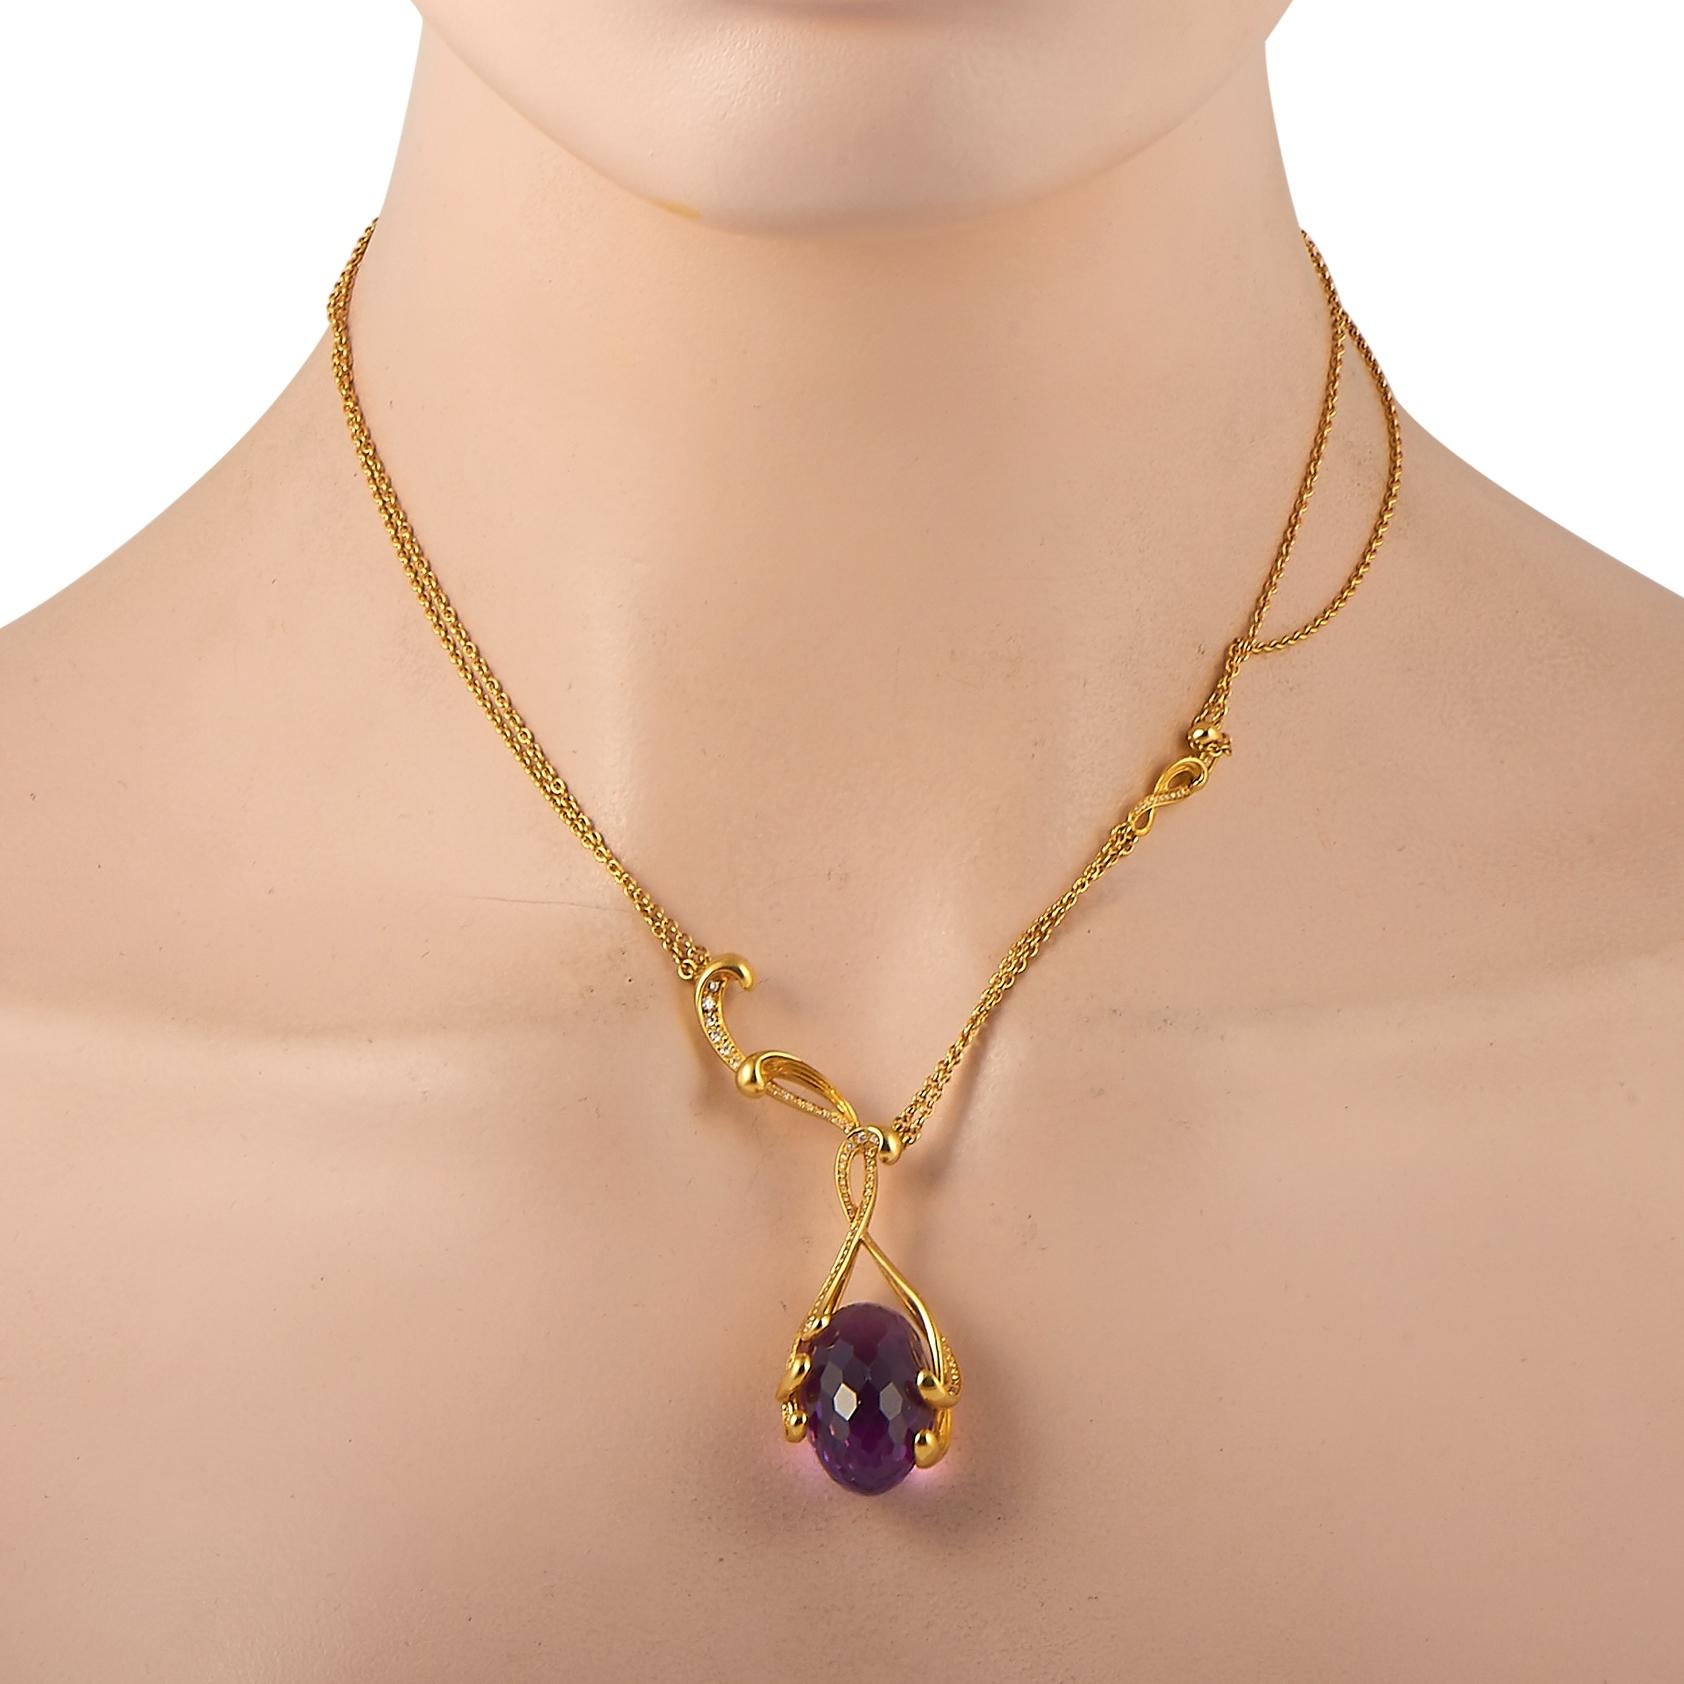 The Carrera y Carrera “Origen Maxi” necklace is crafted from 18K yellow gold and embellished with an amethyst and a total of 0.60 carats of diamonds. The necklace weighs 28 grams and is presented with a 14” chain and a pendant that measures 2” in